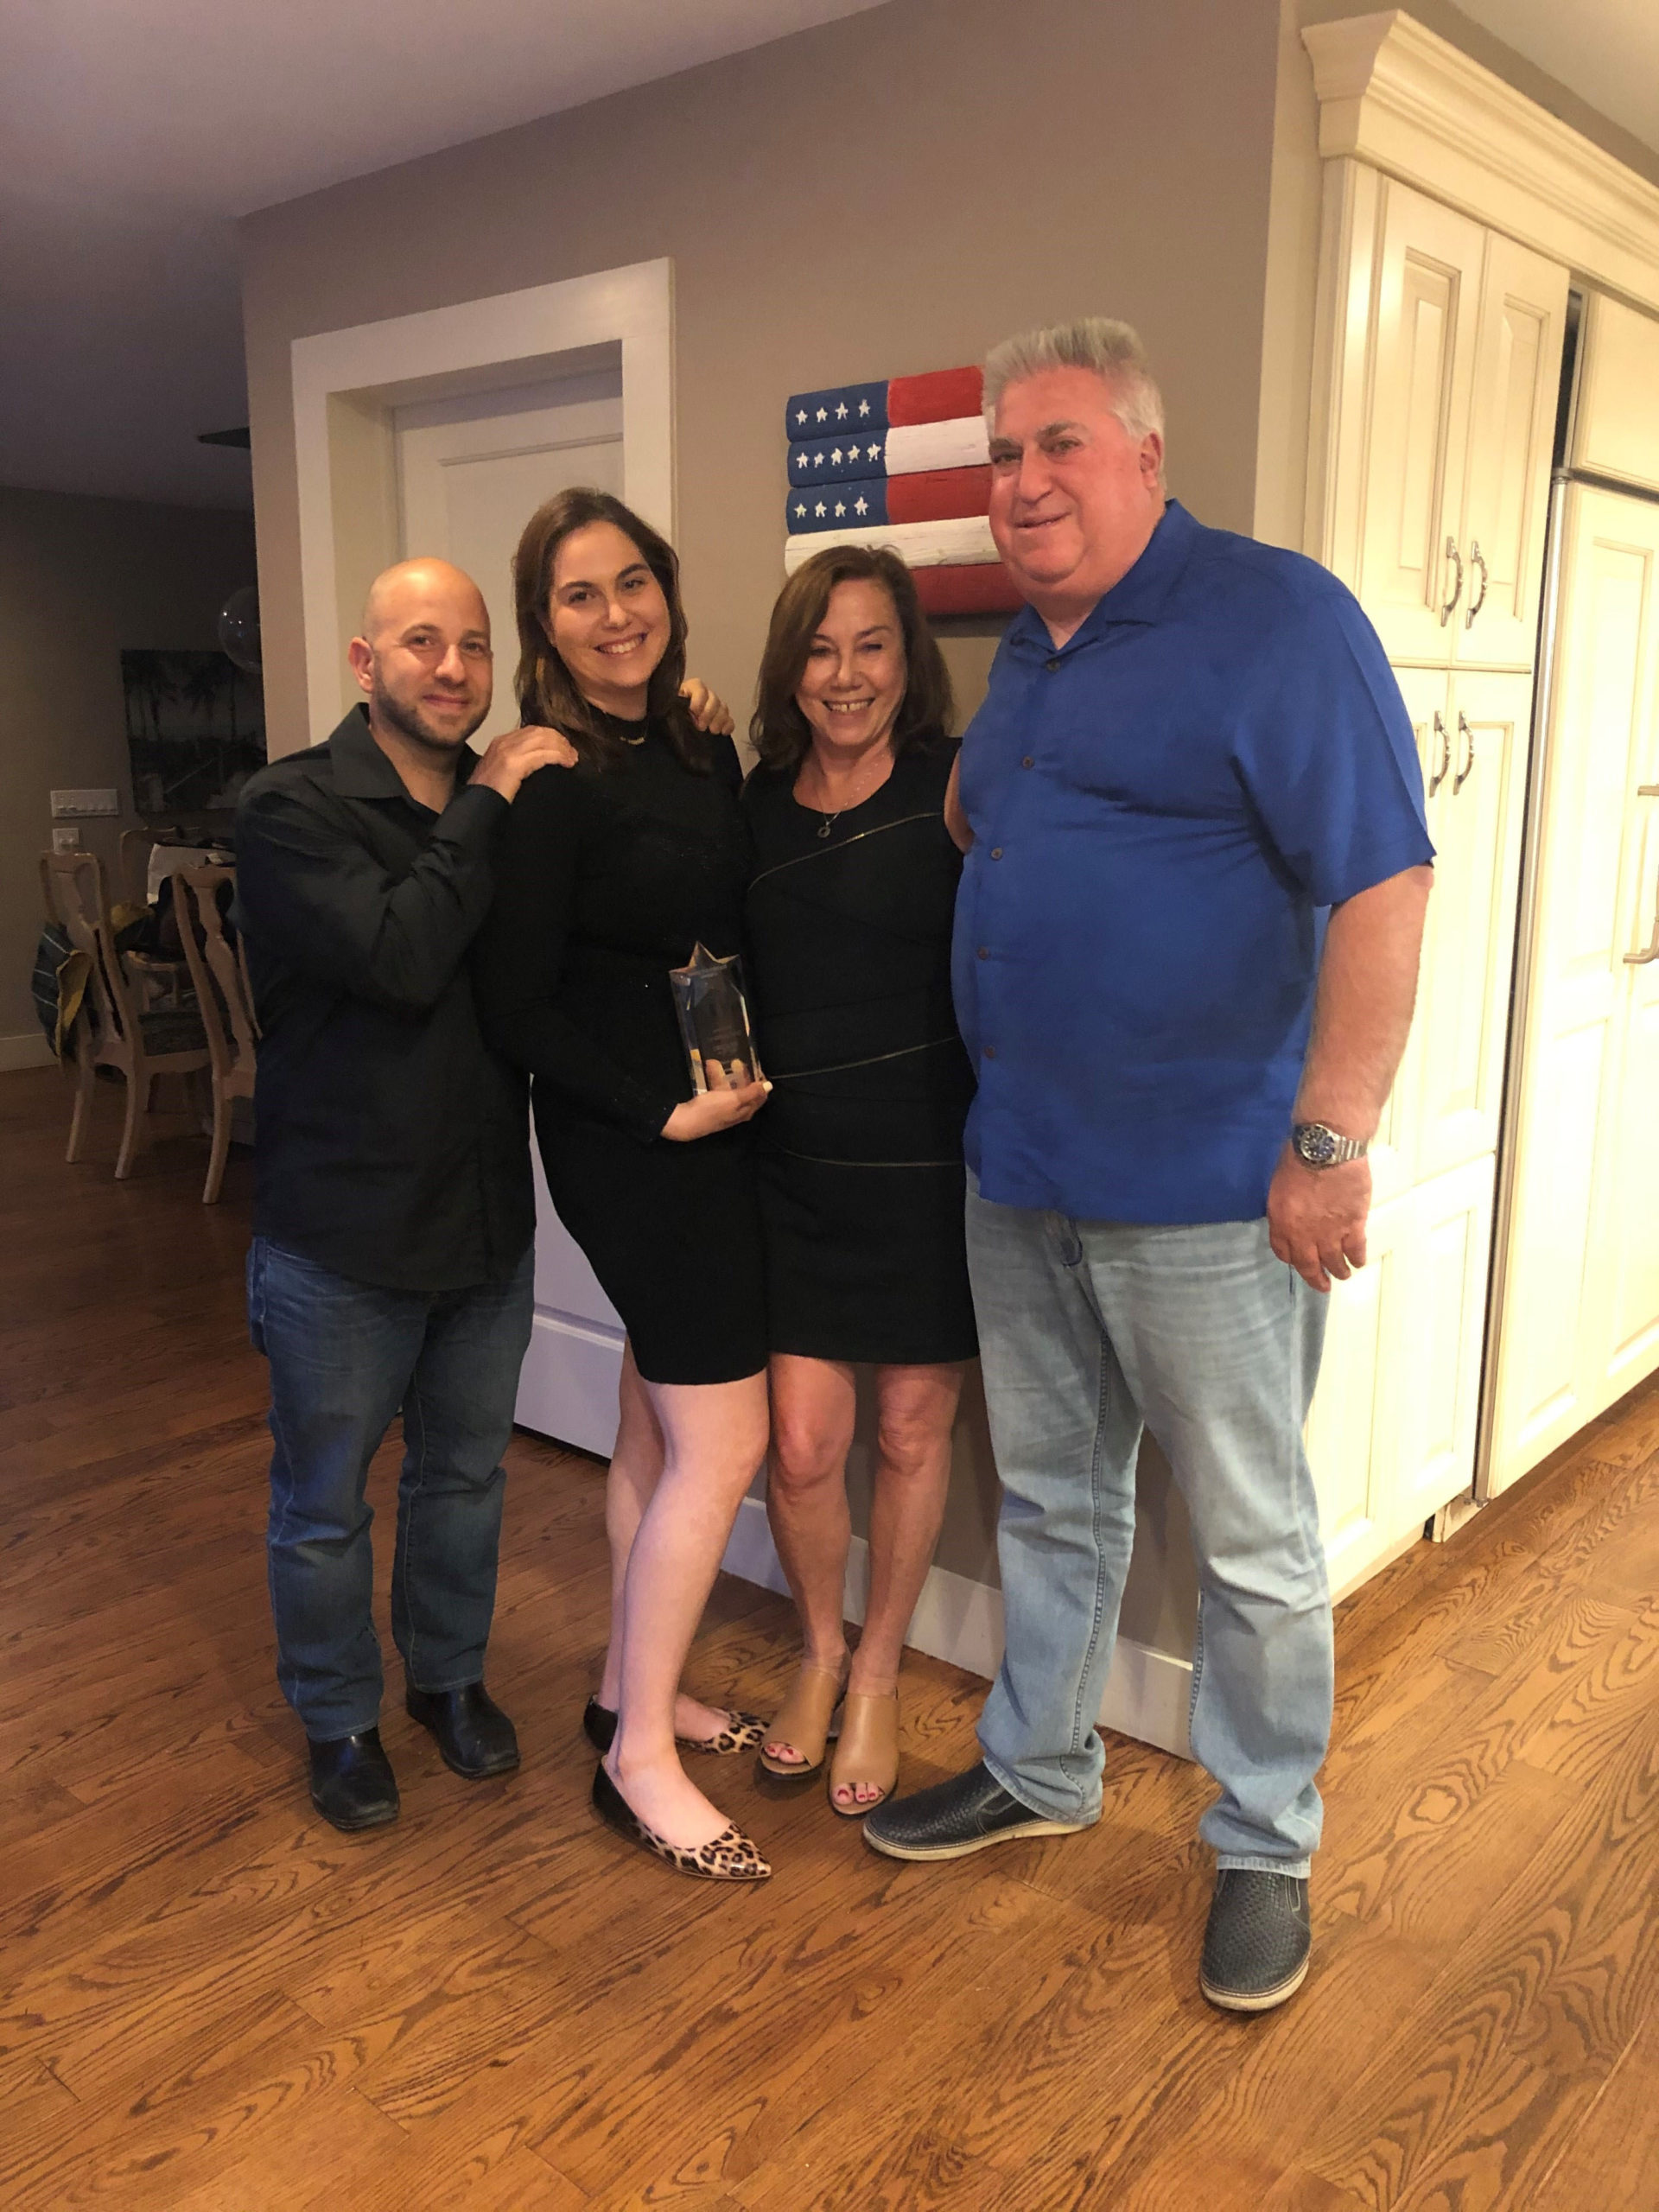 Amanda Goldberg, second from left, and her fiance, Nir Shemesh, with Ms. Goldberg's parents, Denise and Mark Goldberg, founders of the Original Goldberg's bagel empire. Amanda Goldberg, 32, was diagnosed with type 1 diabetes at the age of 9. In lieu of engagement gifts, the couple asked guests to support the Diabetes Research Institute Foundation.